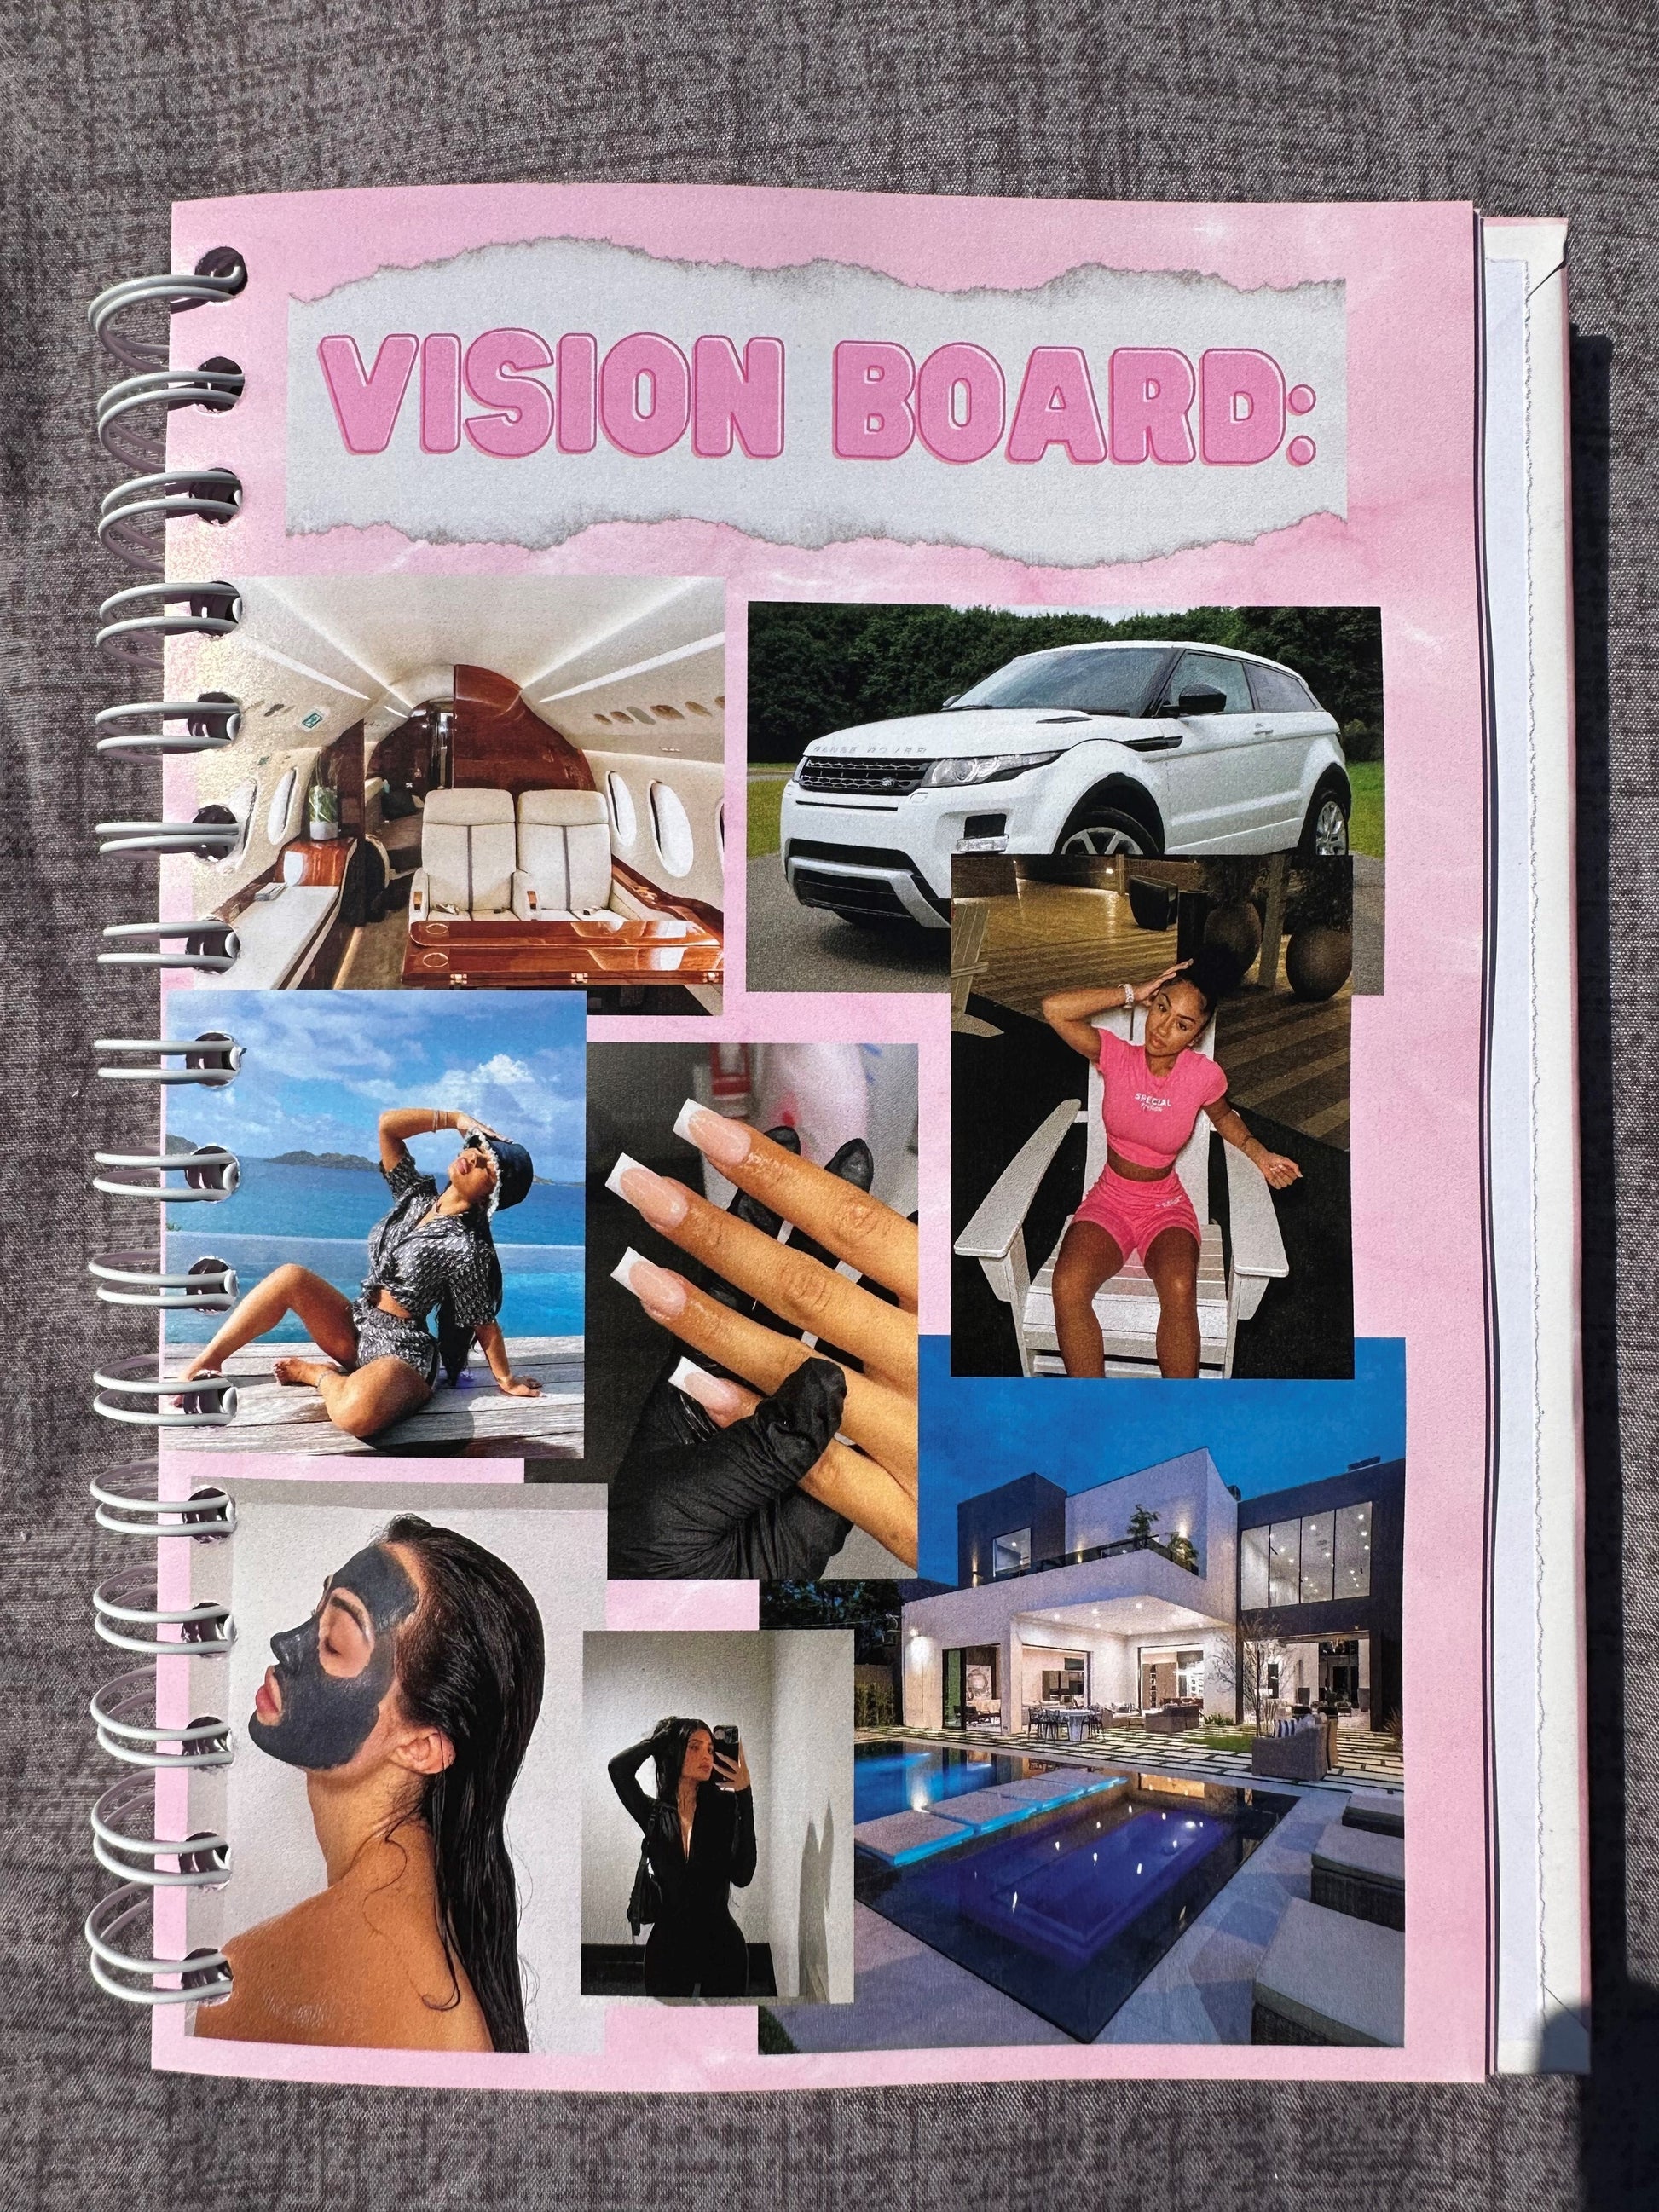 My Vision Board Journal